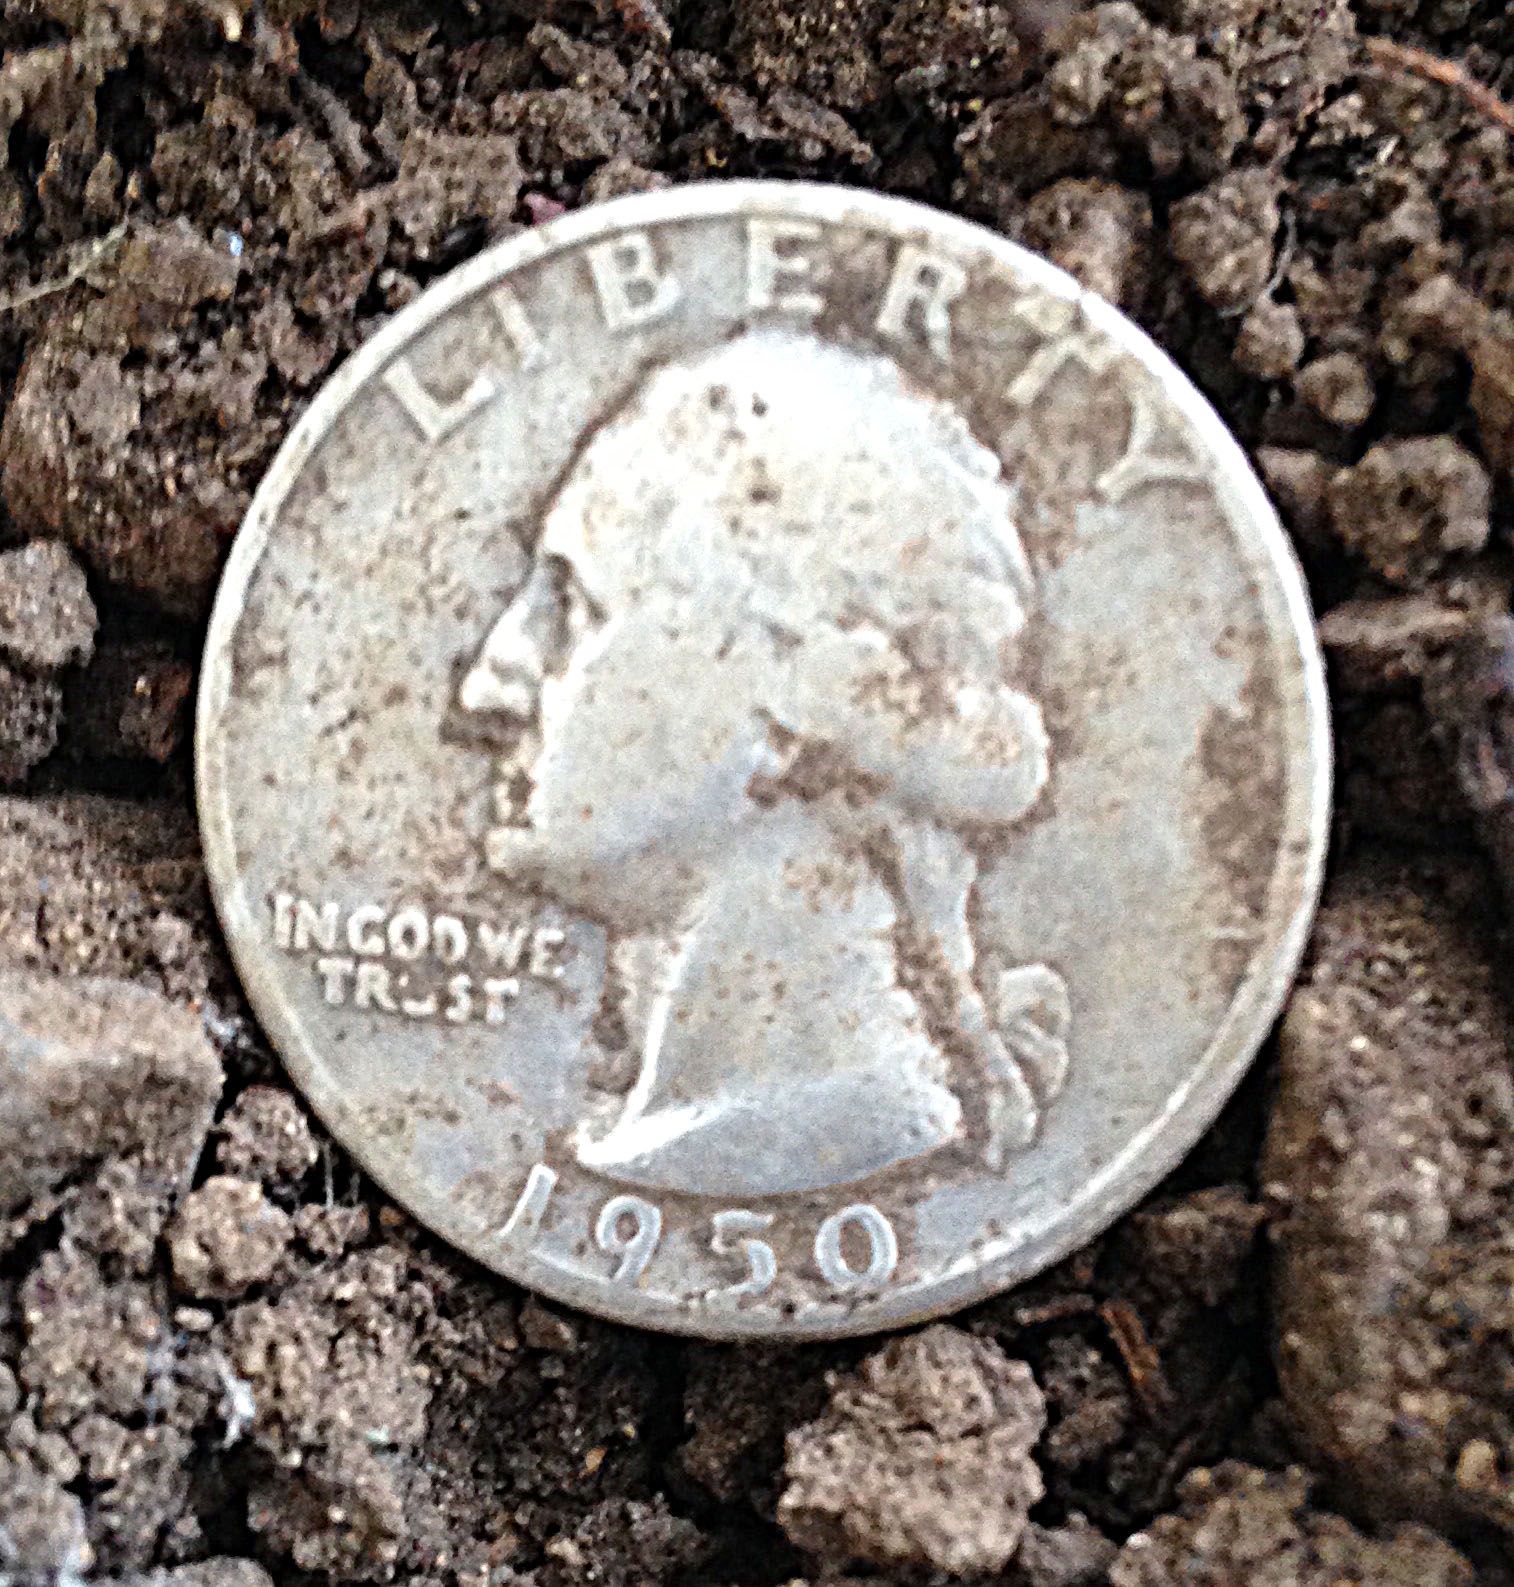 1950 Silver Quarter found in an old athletic field.